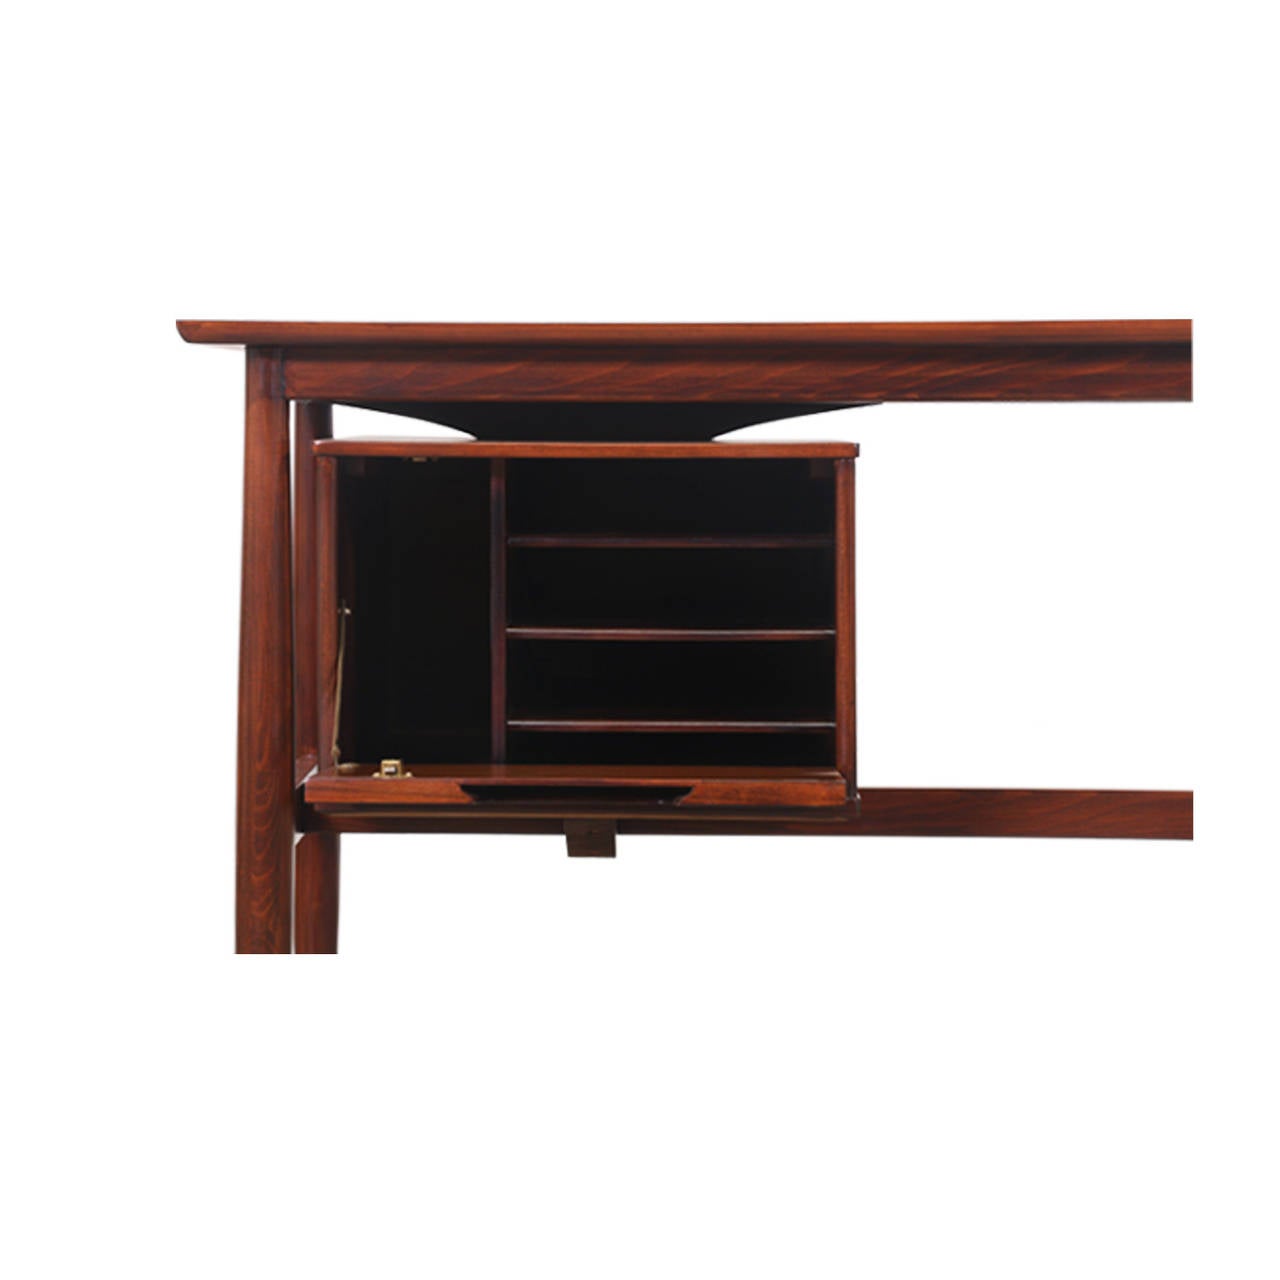 Mid-20th Century Milo Baughman “Today’s Living” Writing Desk for Drexel